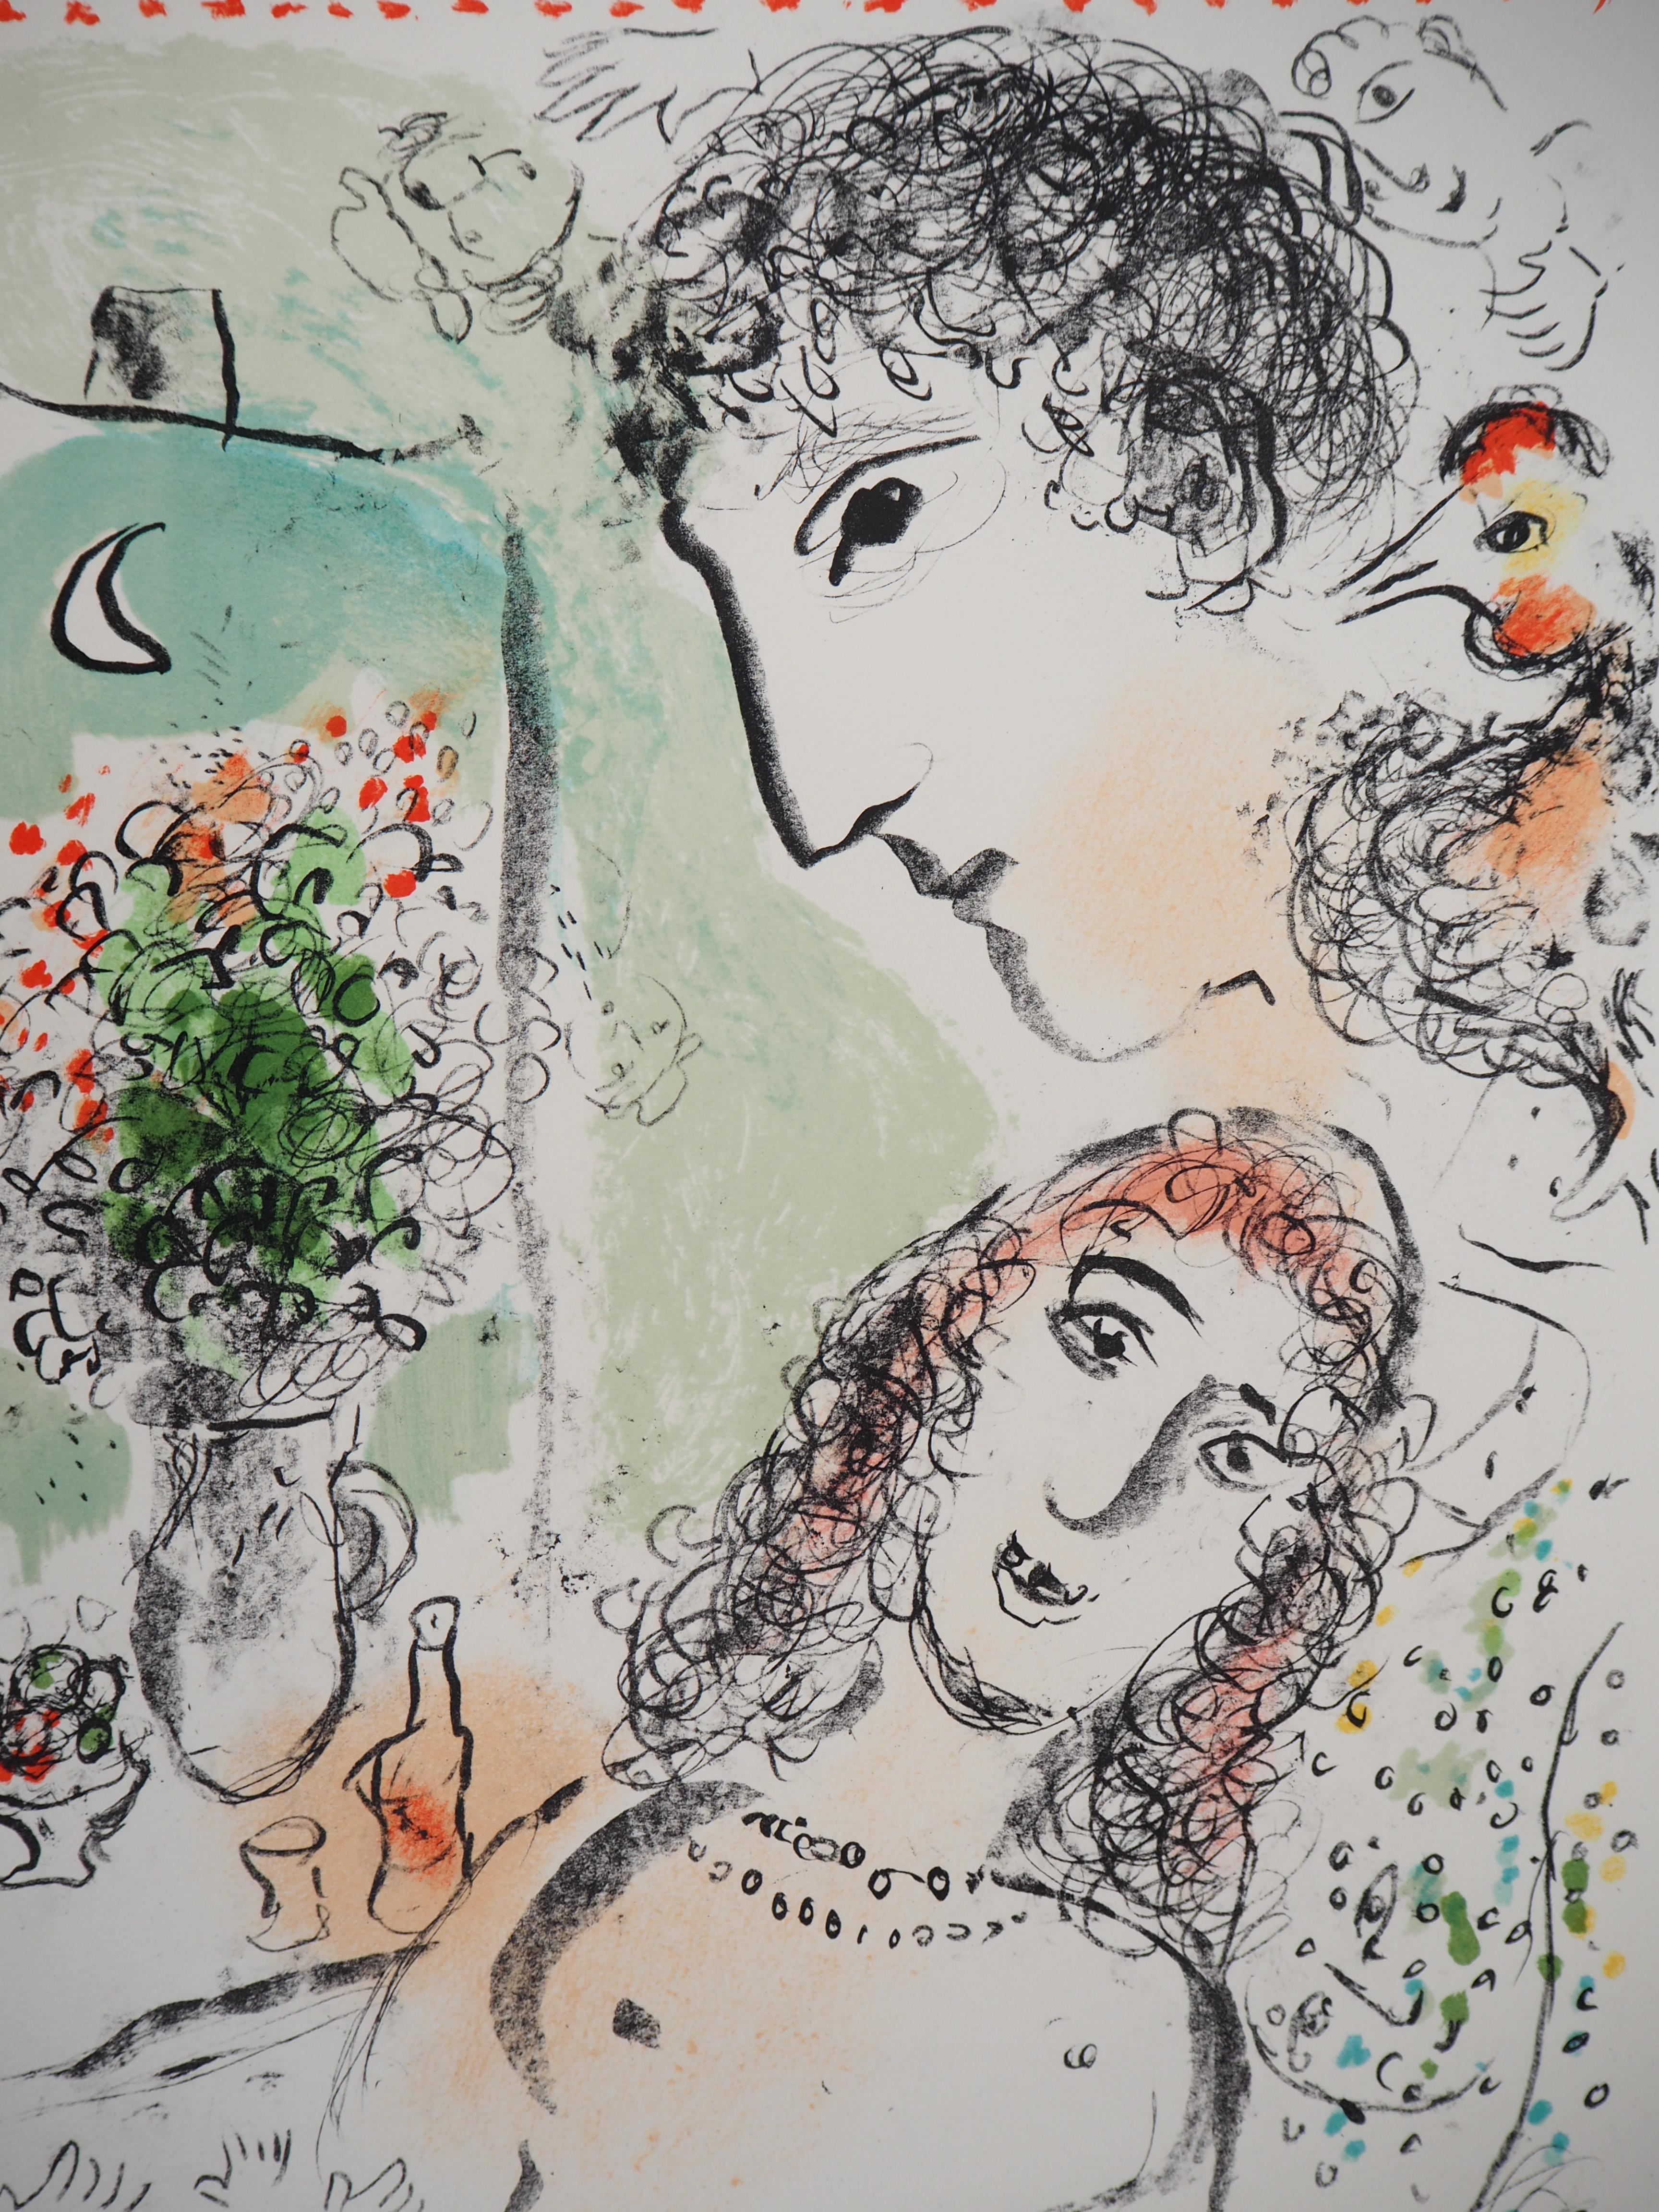 chagall lithographs signed numbered